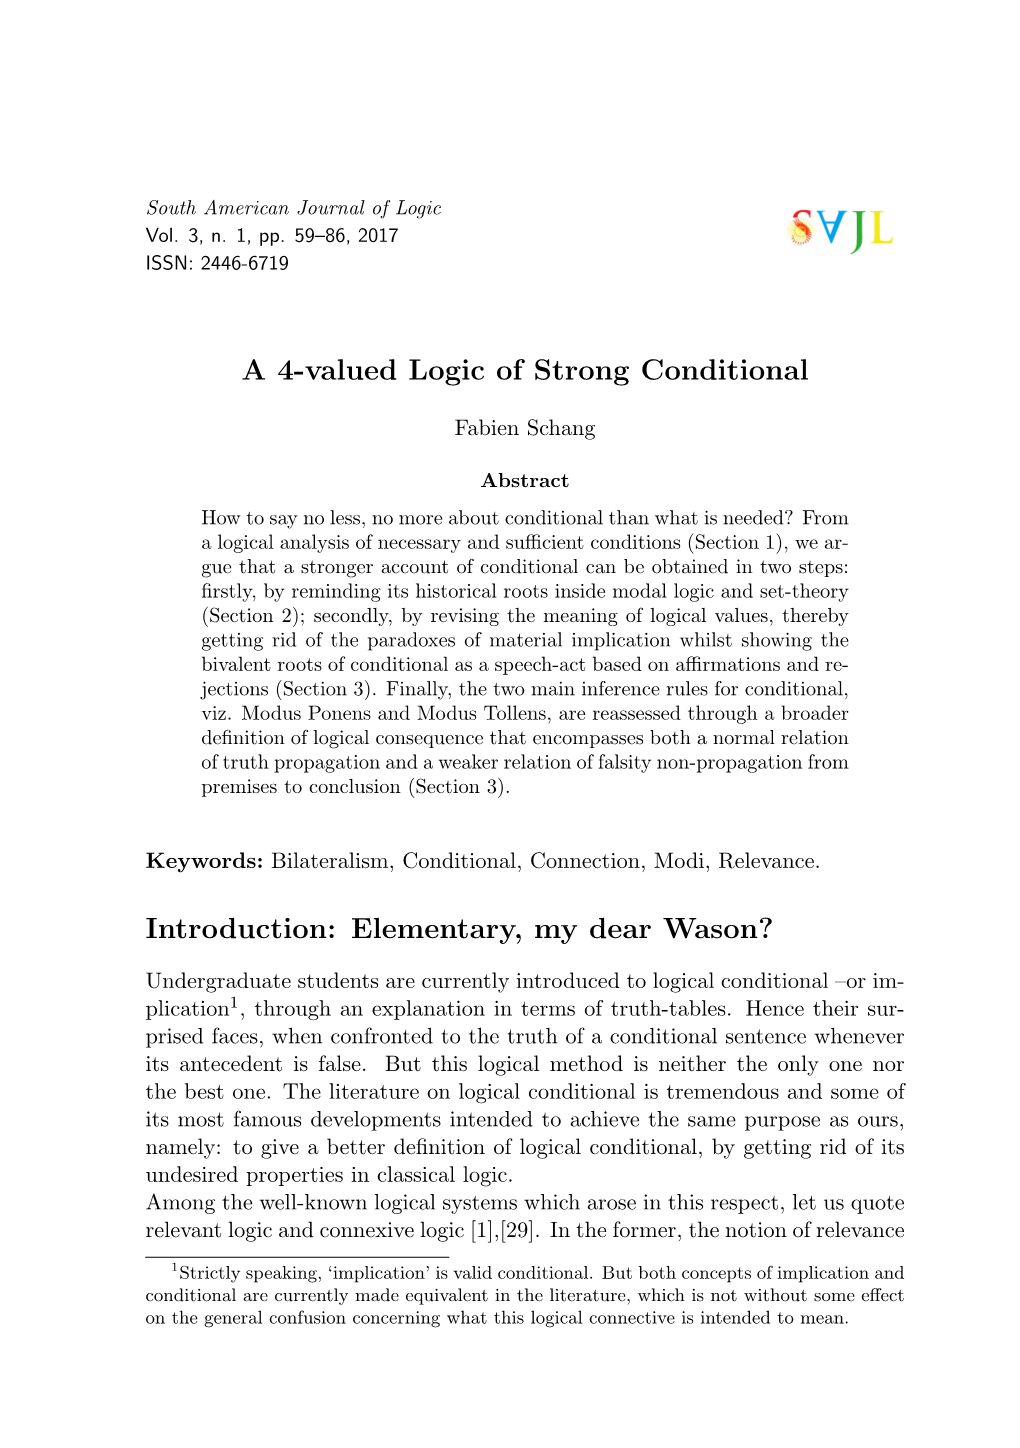 A 4-Valued Logic of Strong Conditional Introduction